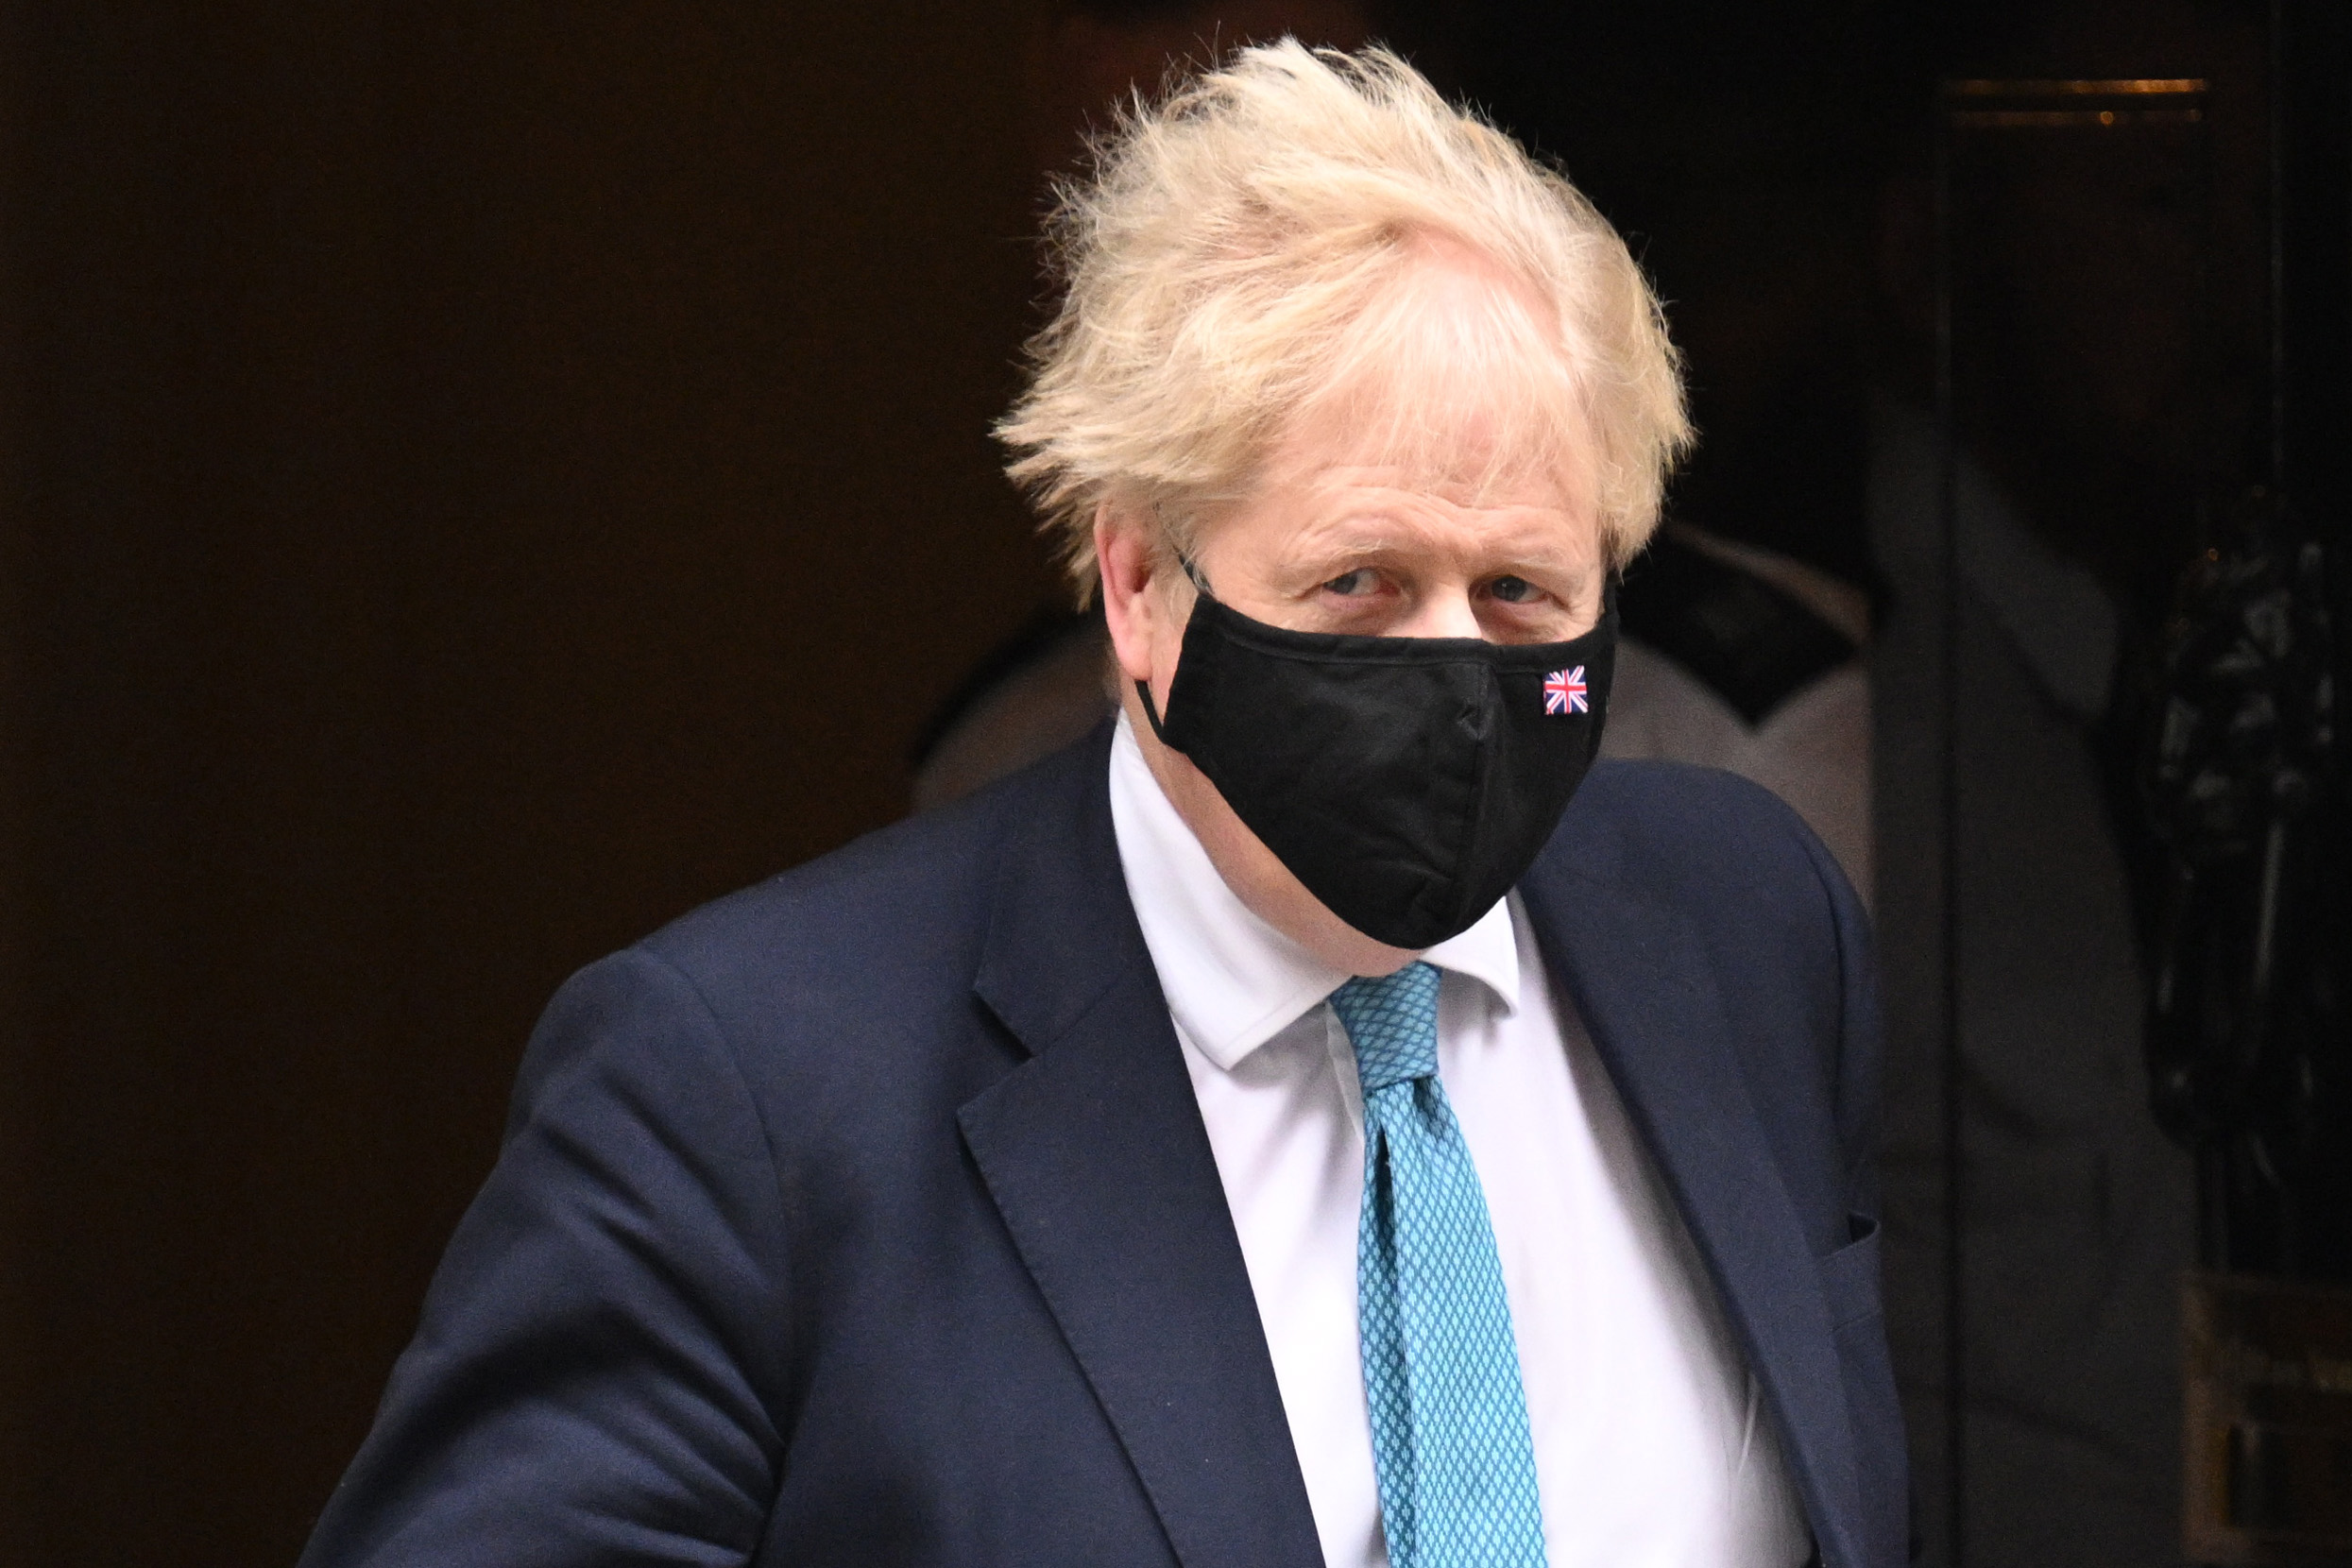 British Prime Minister Boris Johnson leaves 10 Downing Street to attend the weekly PMQs in the House of Commons on January 26 in London, England.